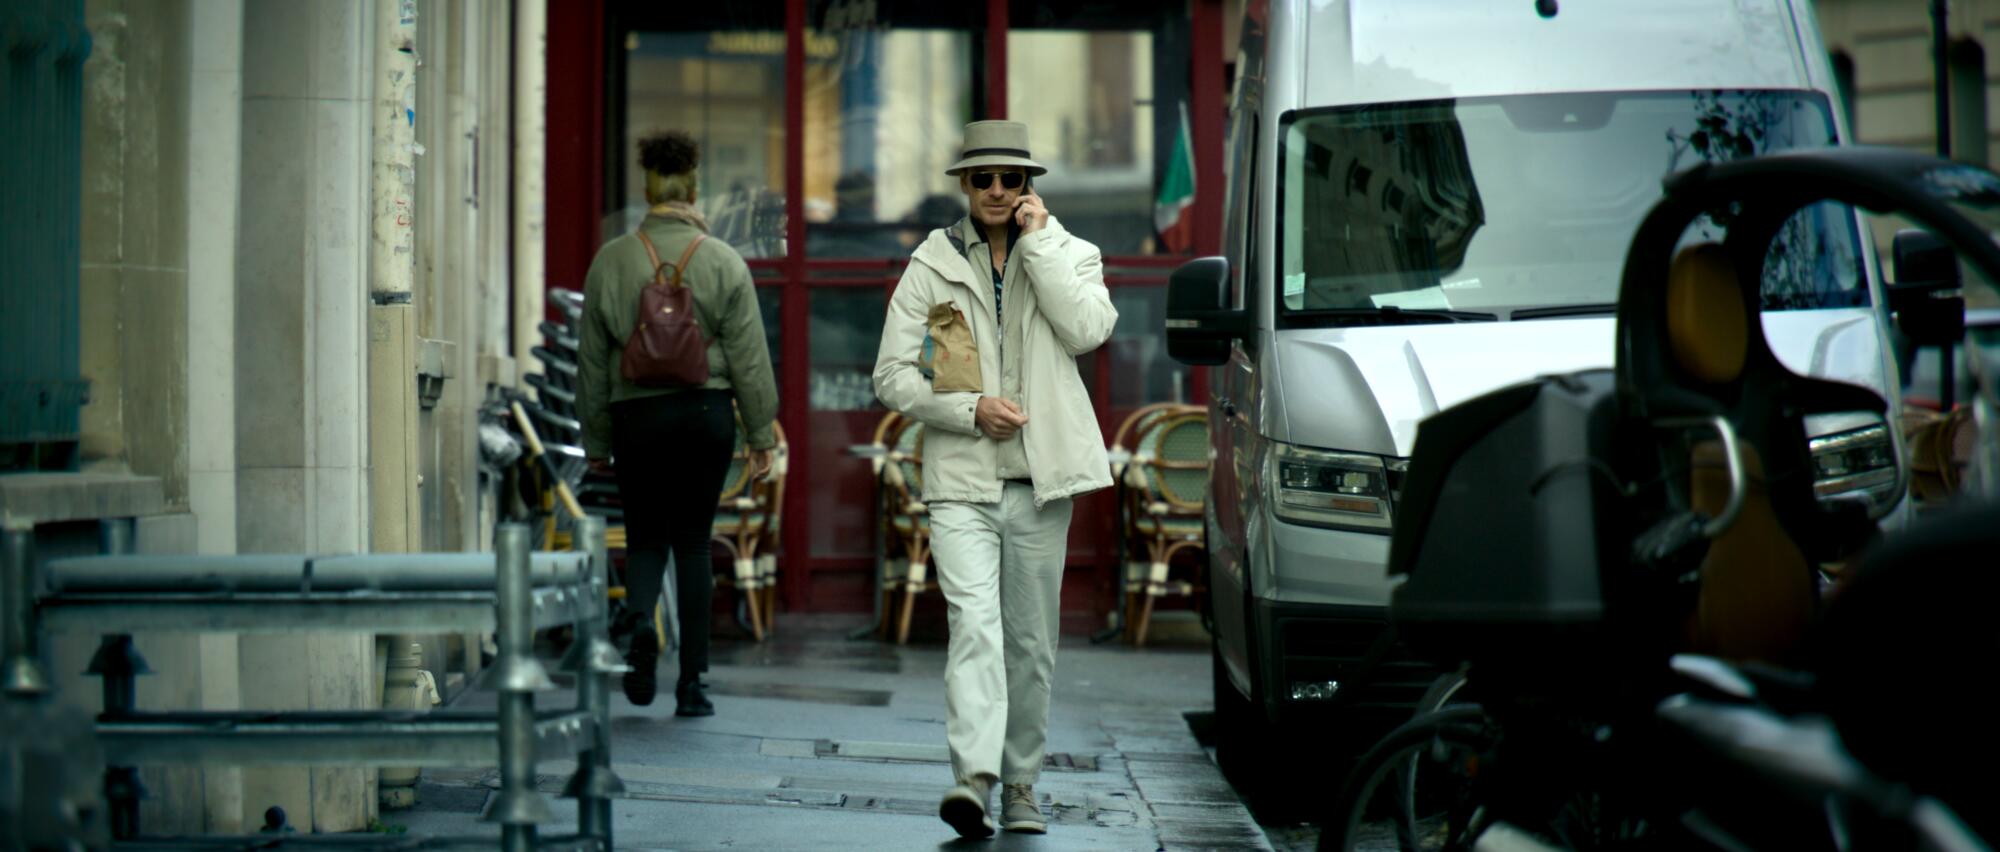 A man in shades and a white hat walks down a city street.